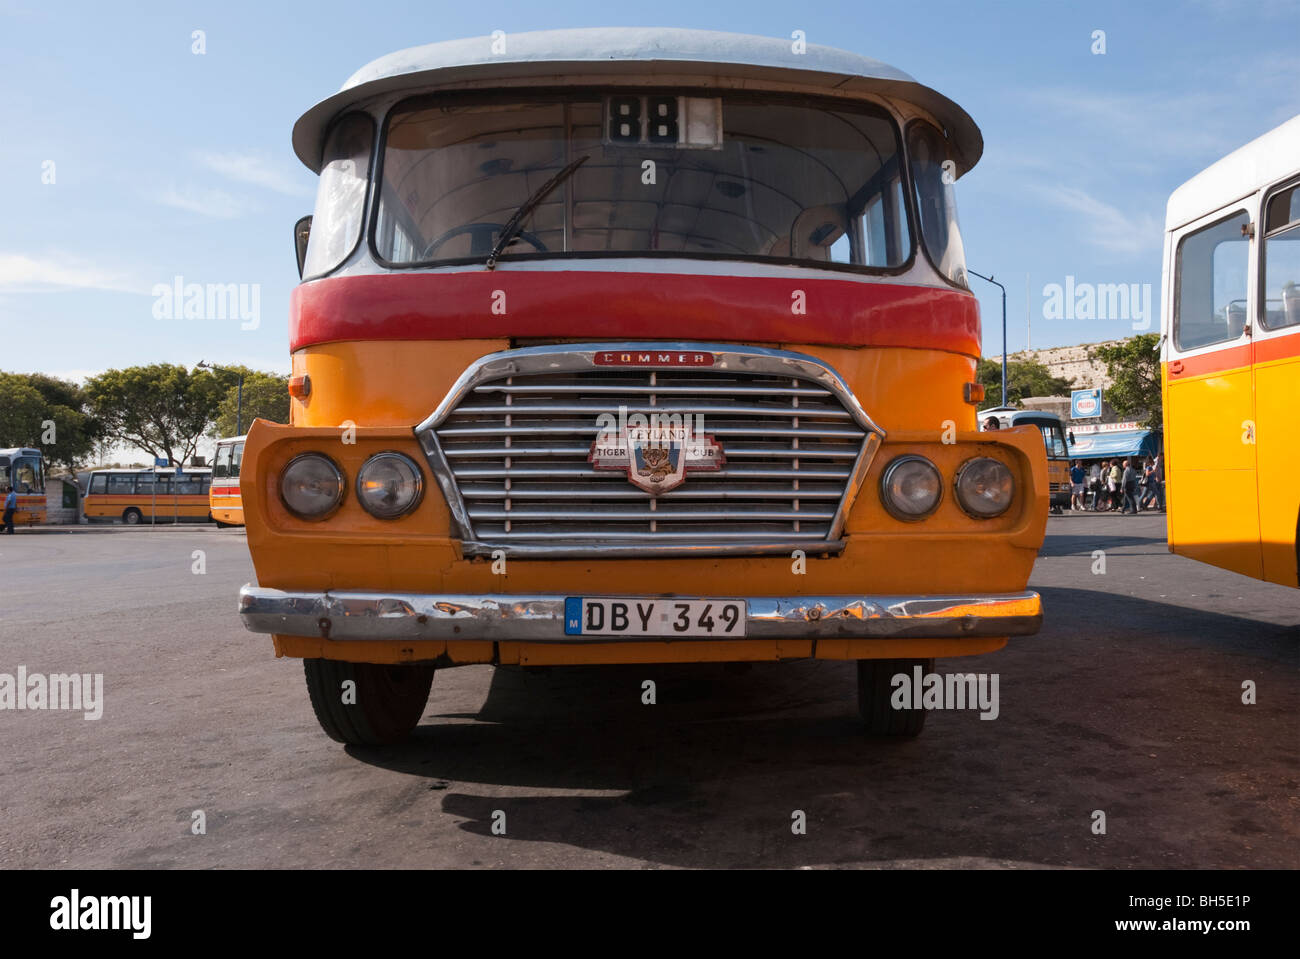 Classic Maltese bus characterised by it's colourful paint work at the Bus Station, Valetta, Malta, Europe. Stock Photo